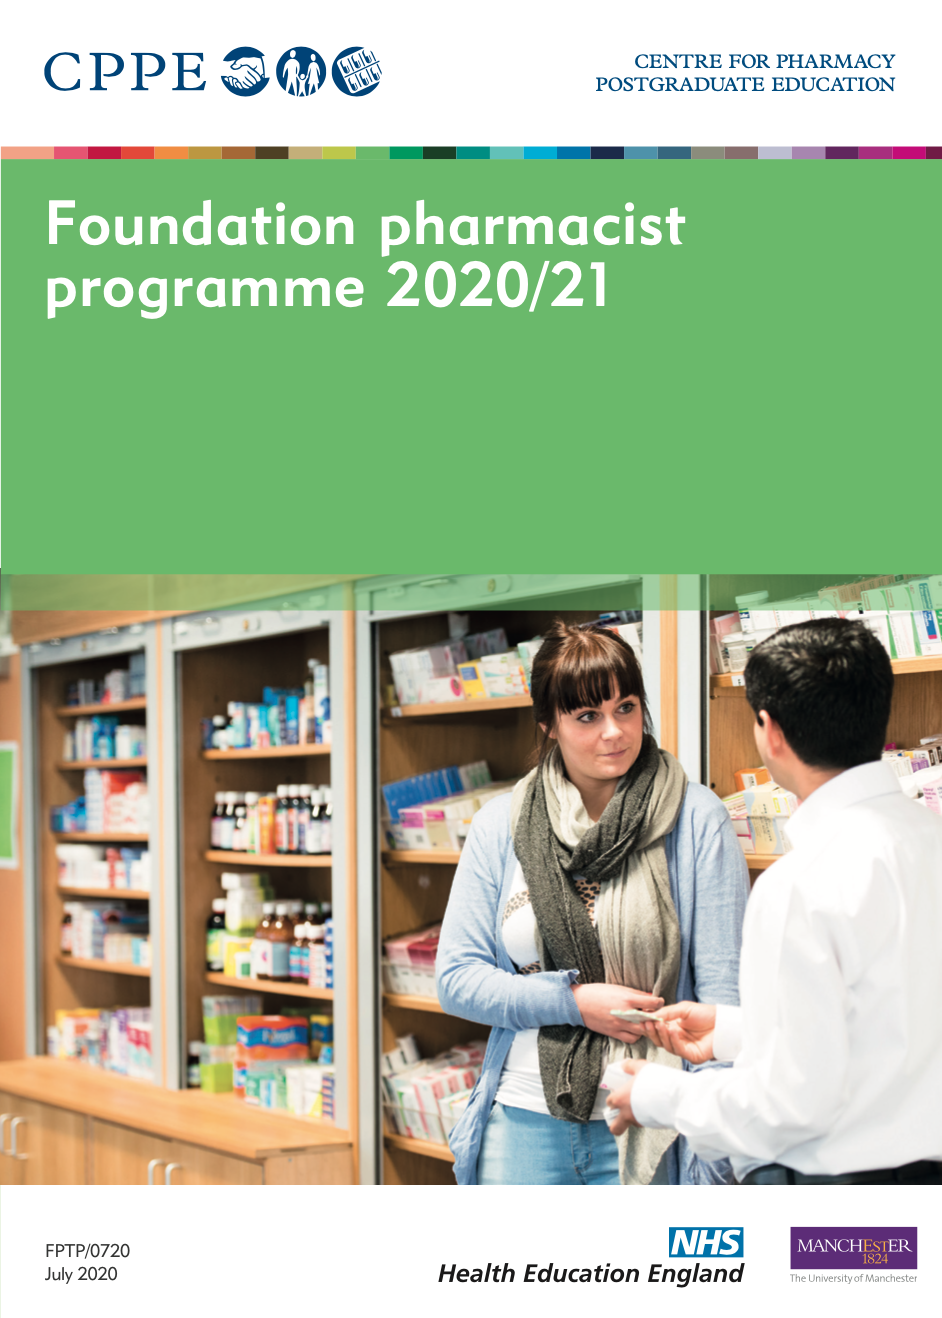 CPPE Foundation Pharmacist Programme 2020-21 leaflet.png